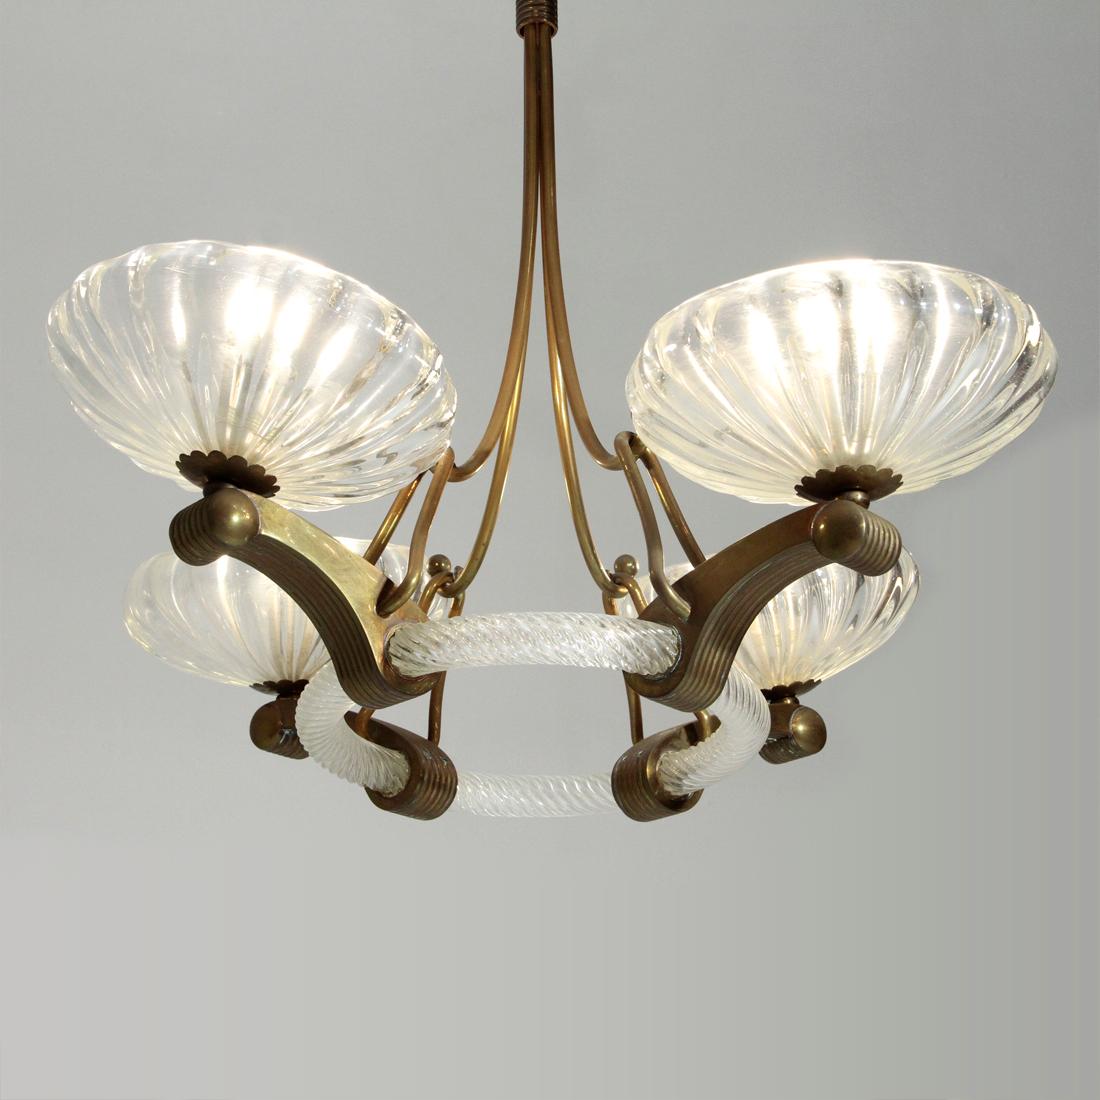 Italian manufacture chandelier produced in the 1930s. Tige and rosette in brass.
Body of the chandelier in brass and torchon glass.
Glass diffusers with brass details.
Good general conditions, some signs of use due to normal use over time, wiring